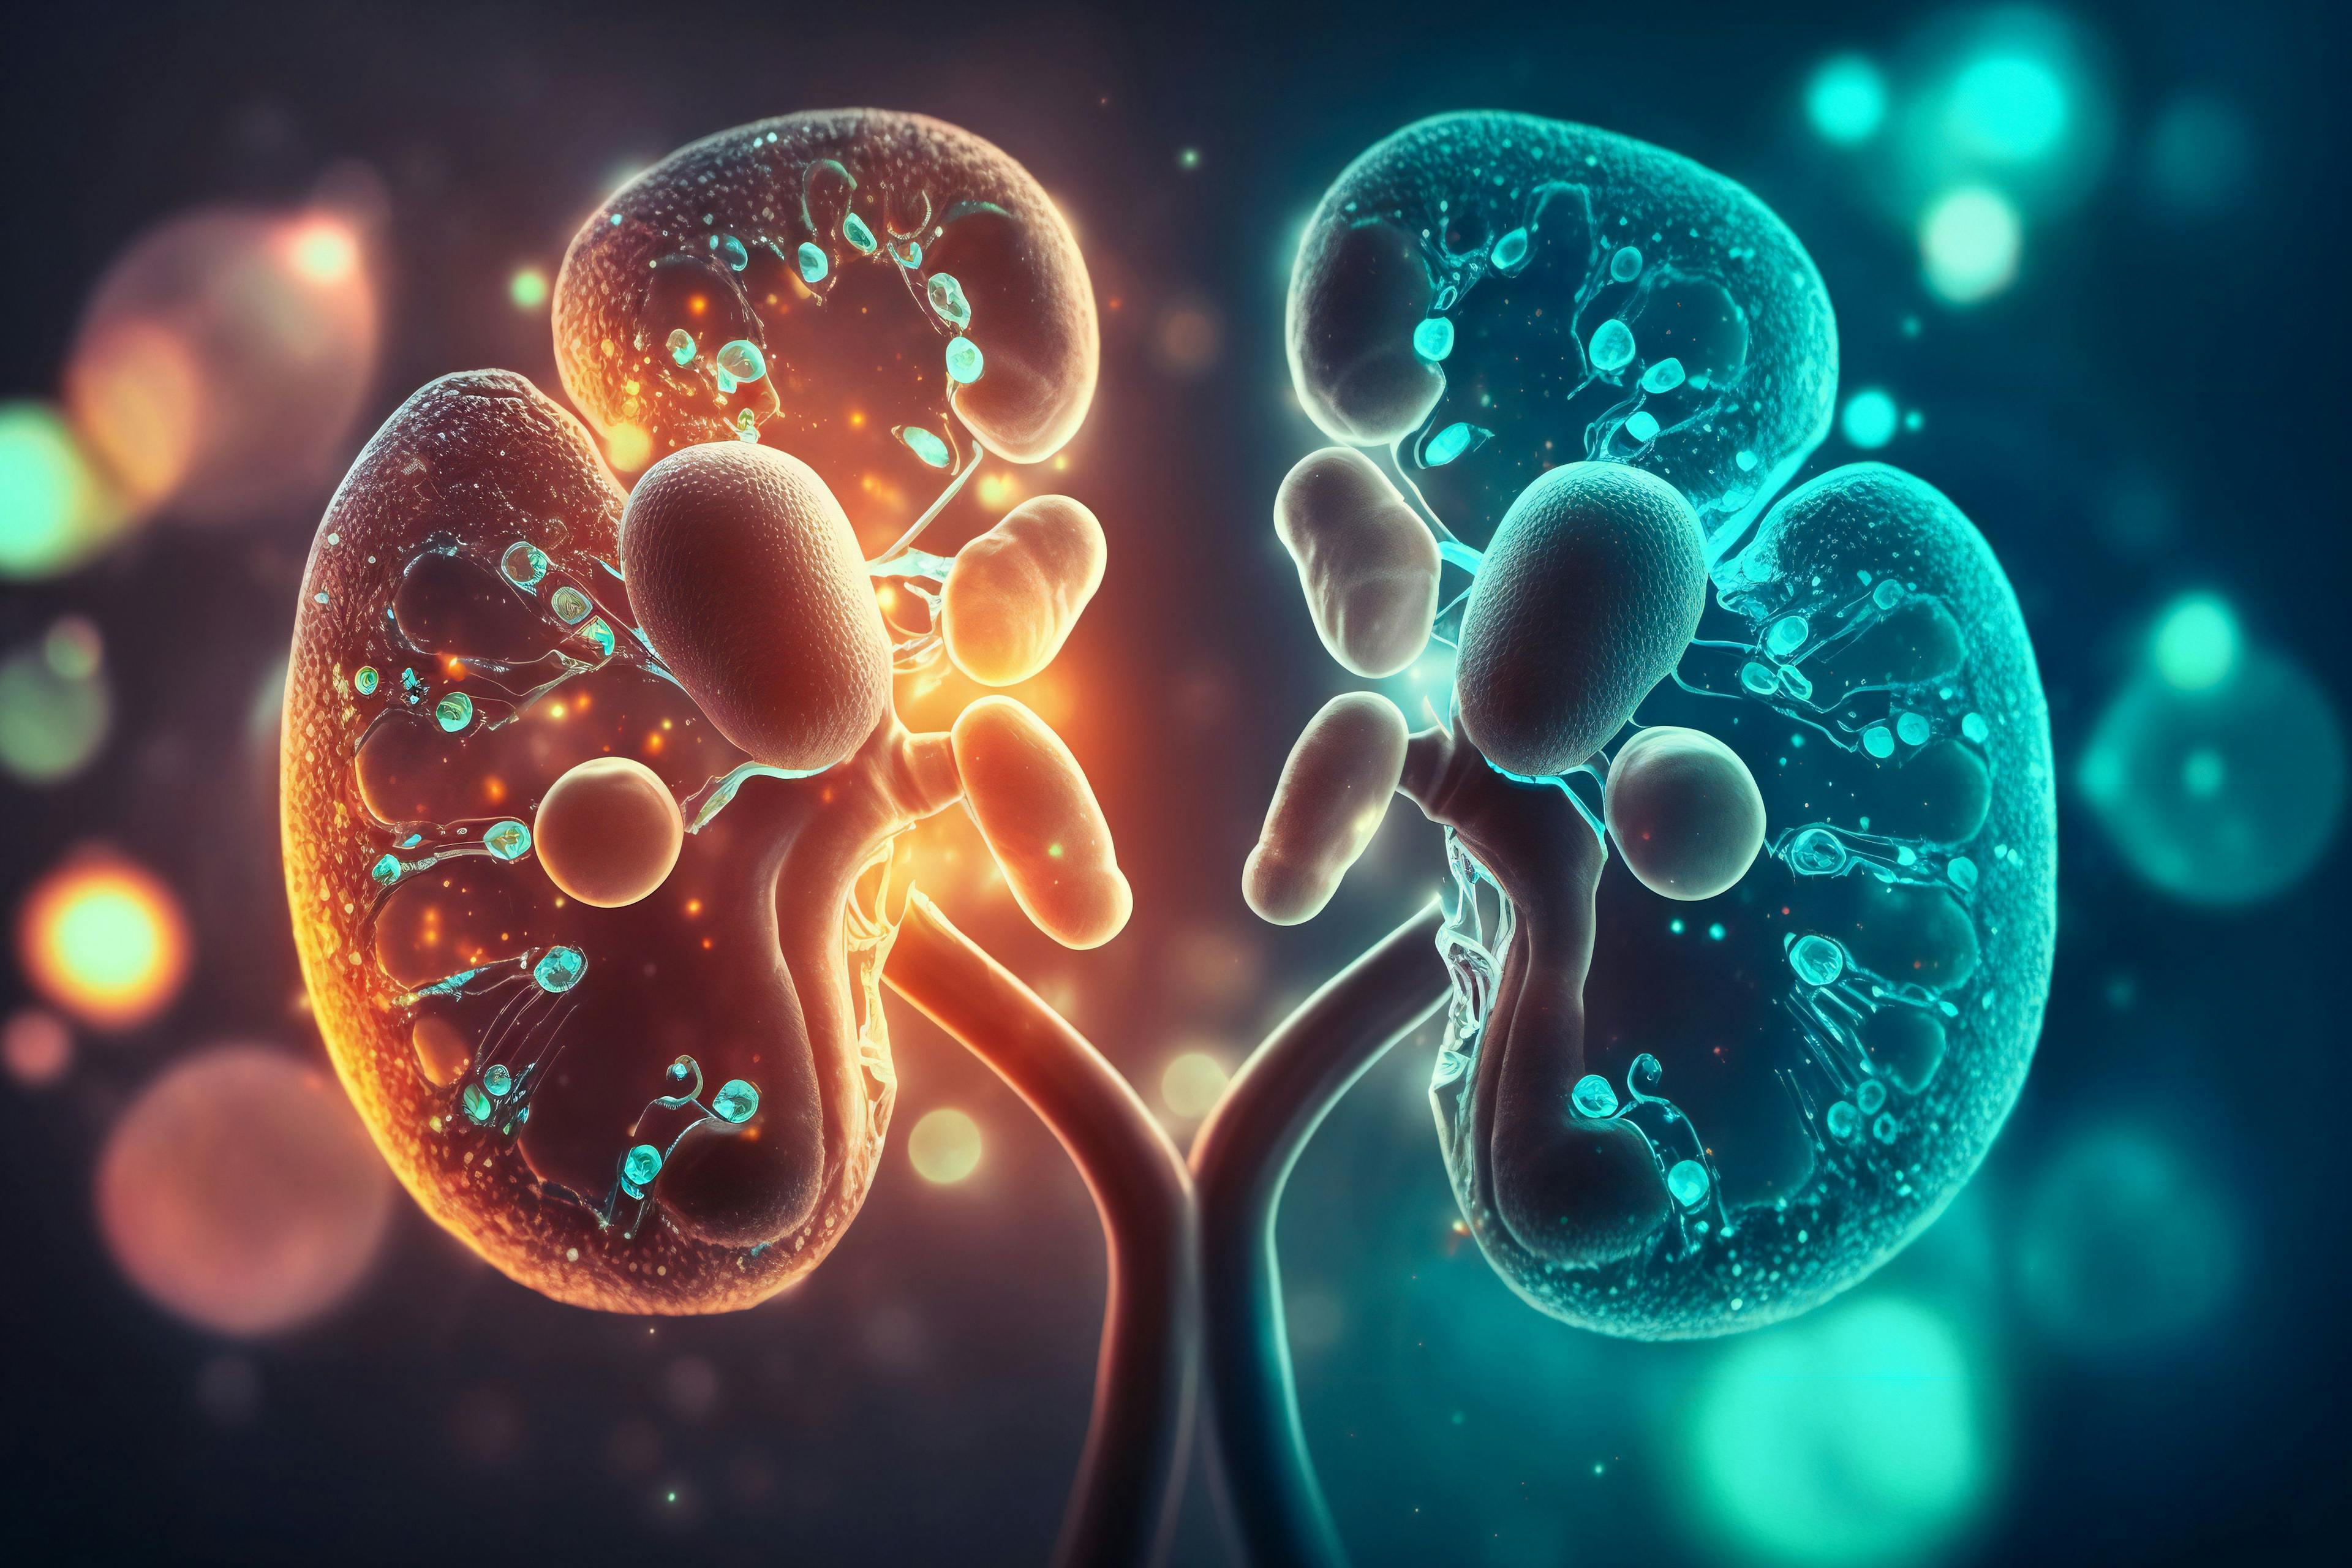 the Kidneys emphasized, symbolizing the importance of the central nervous system and its role in human functioning | Image Credit: © Nilima - www.stock.adobe.com